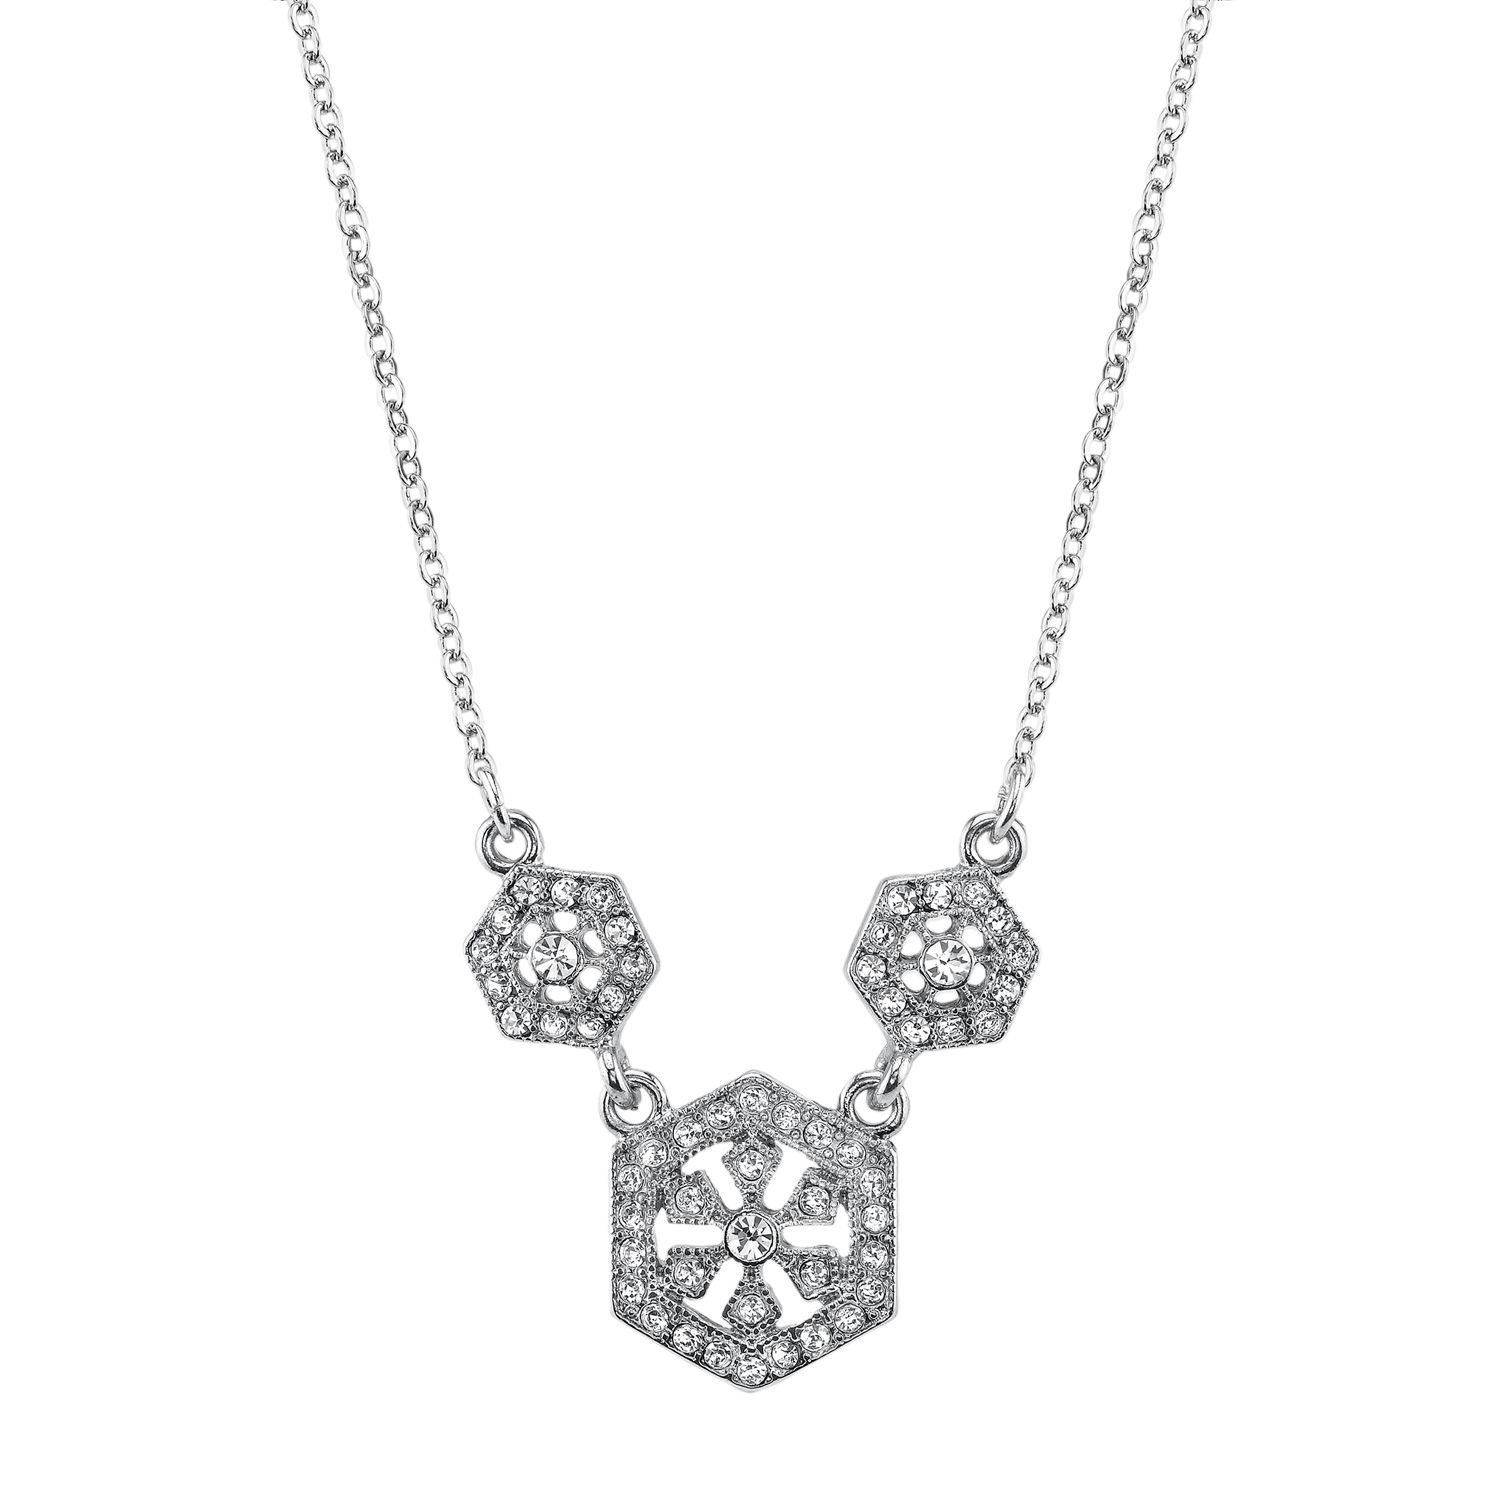 Image for Downton Abbey Triple Hexagon Necklace at Kohl's.